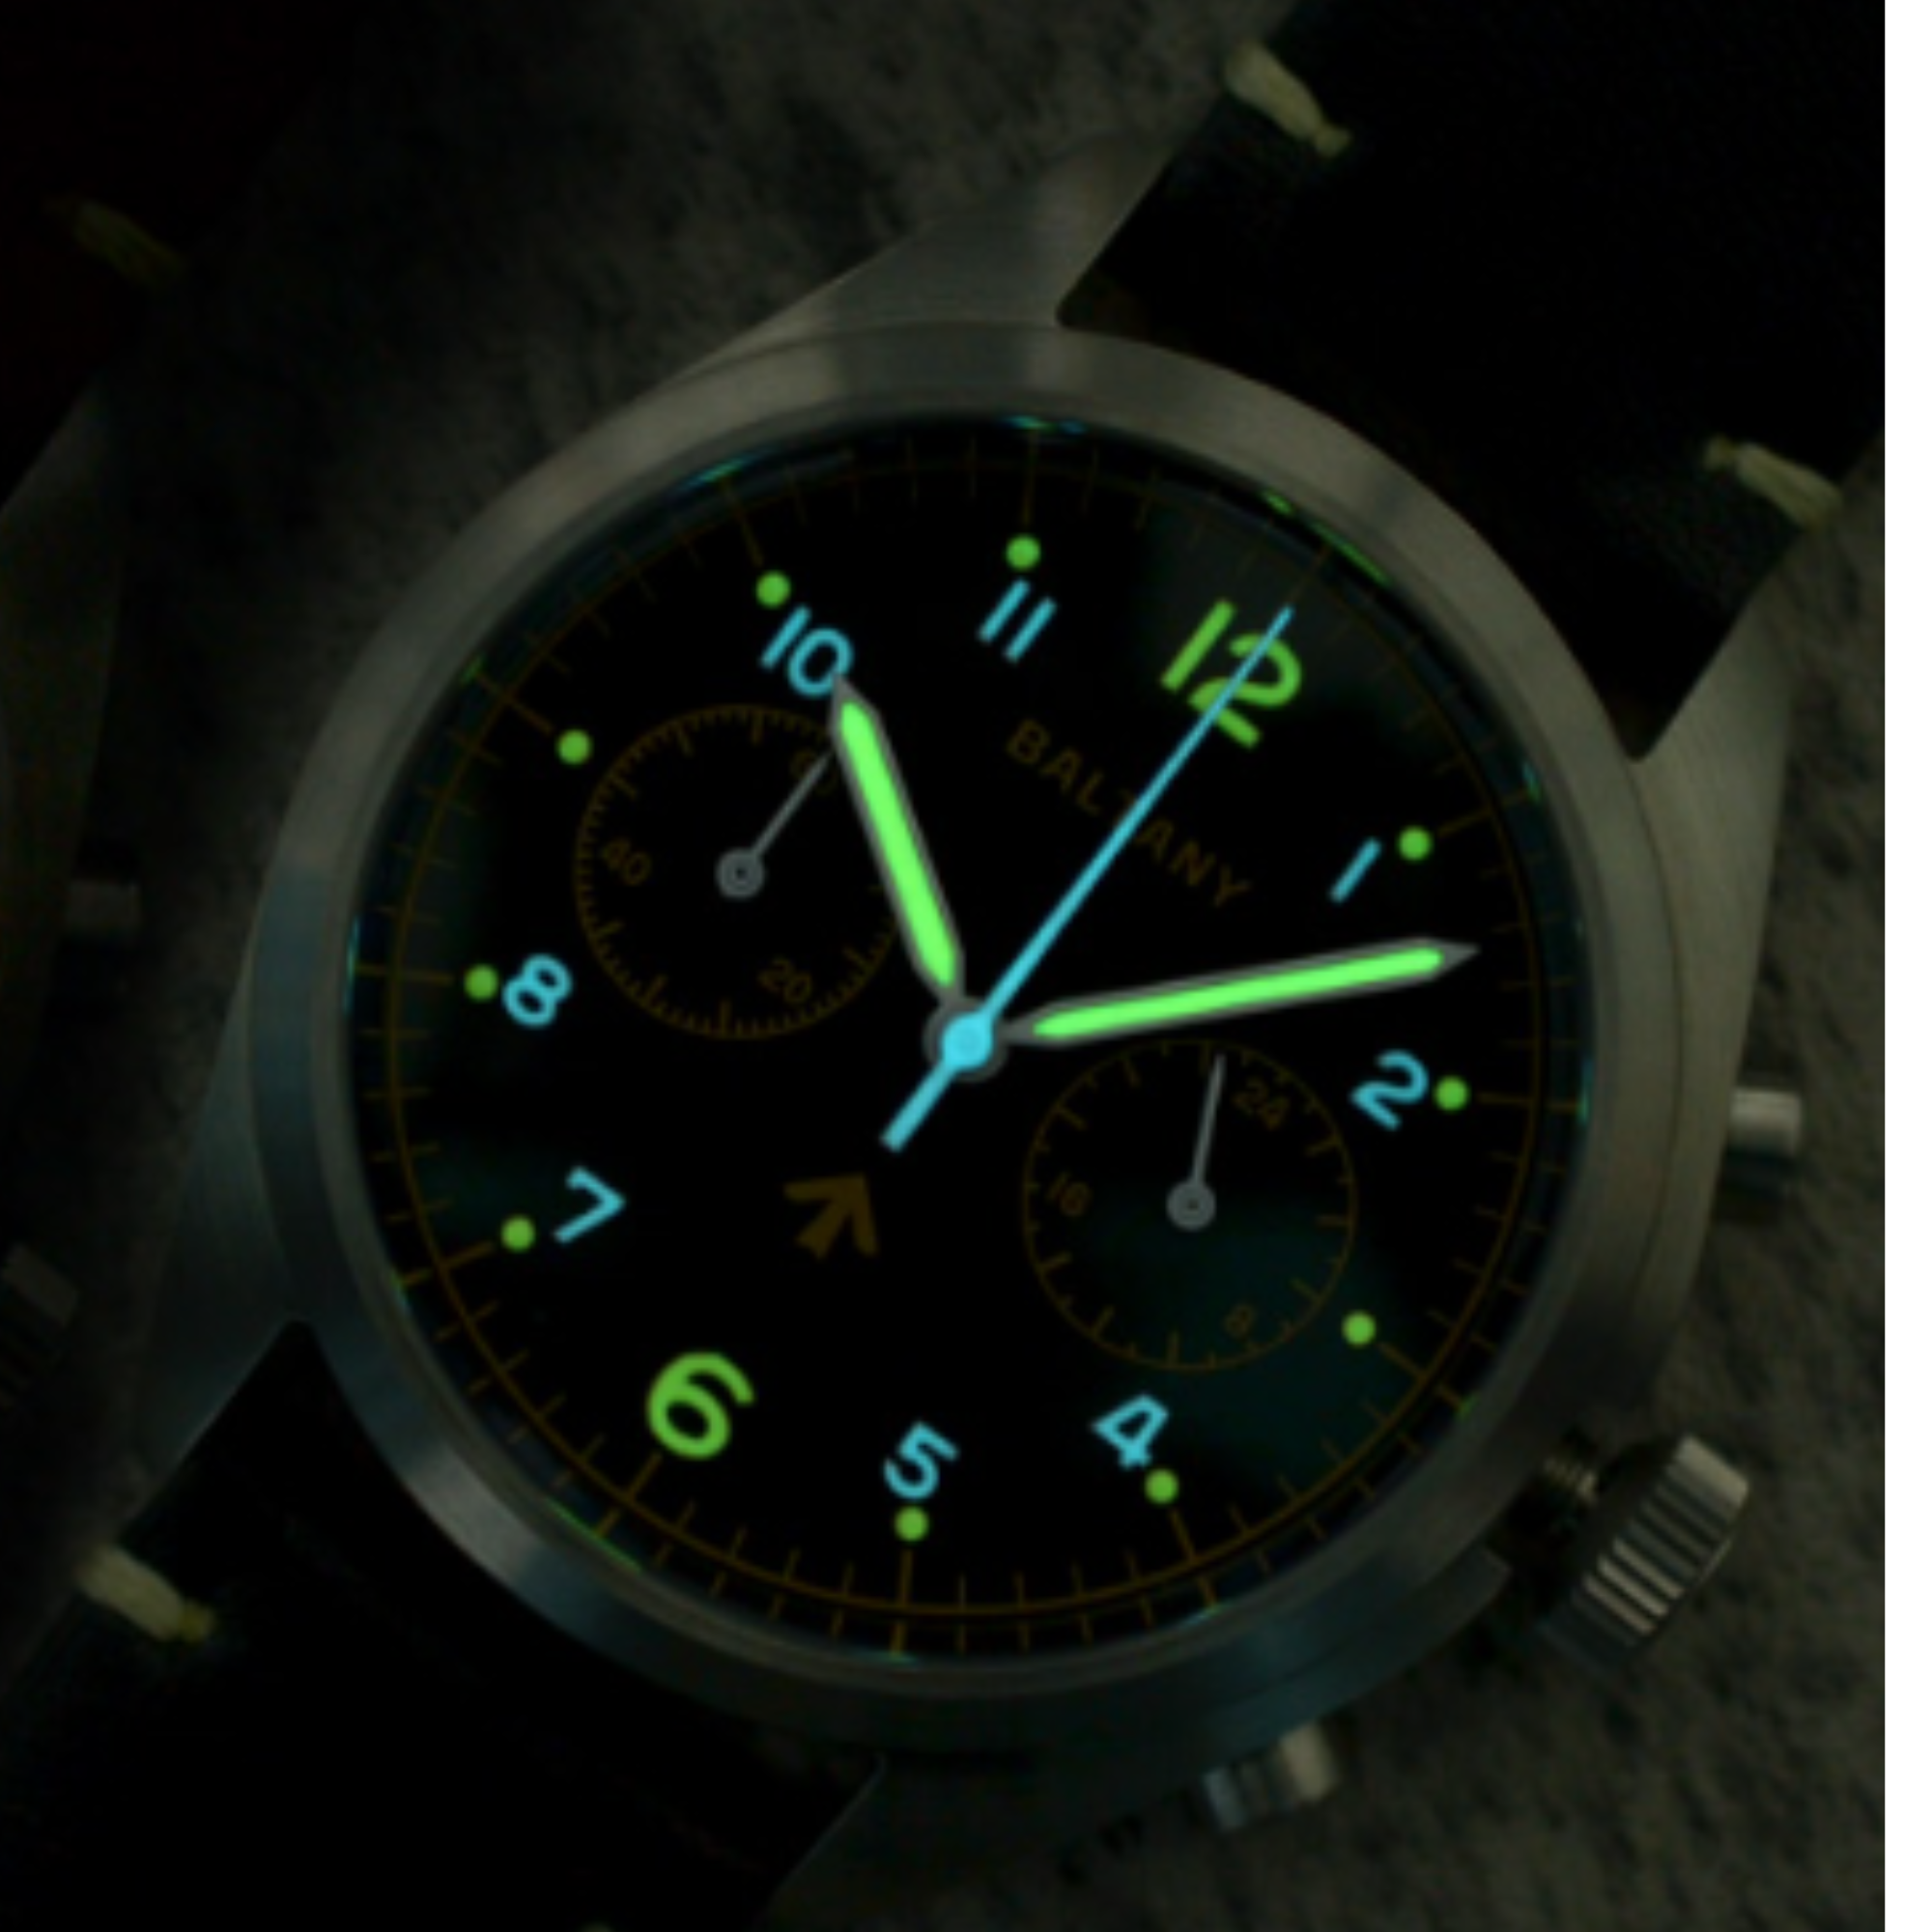 baltany mens automatic military field dress watches india dream watches